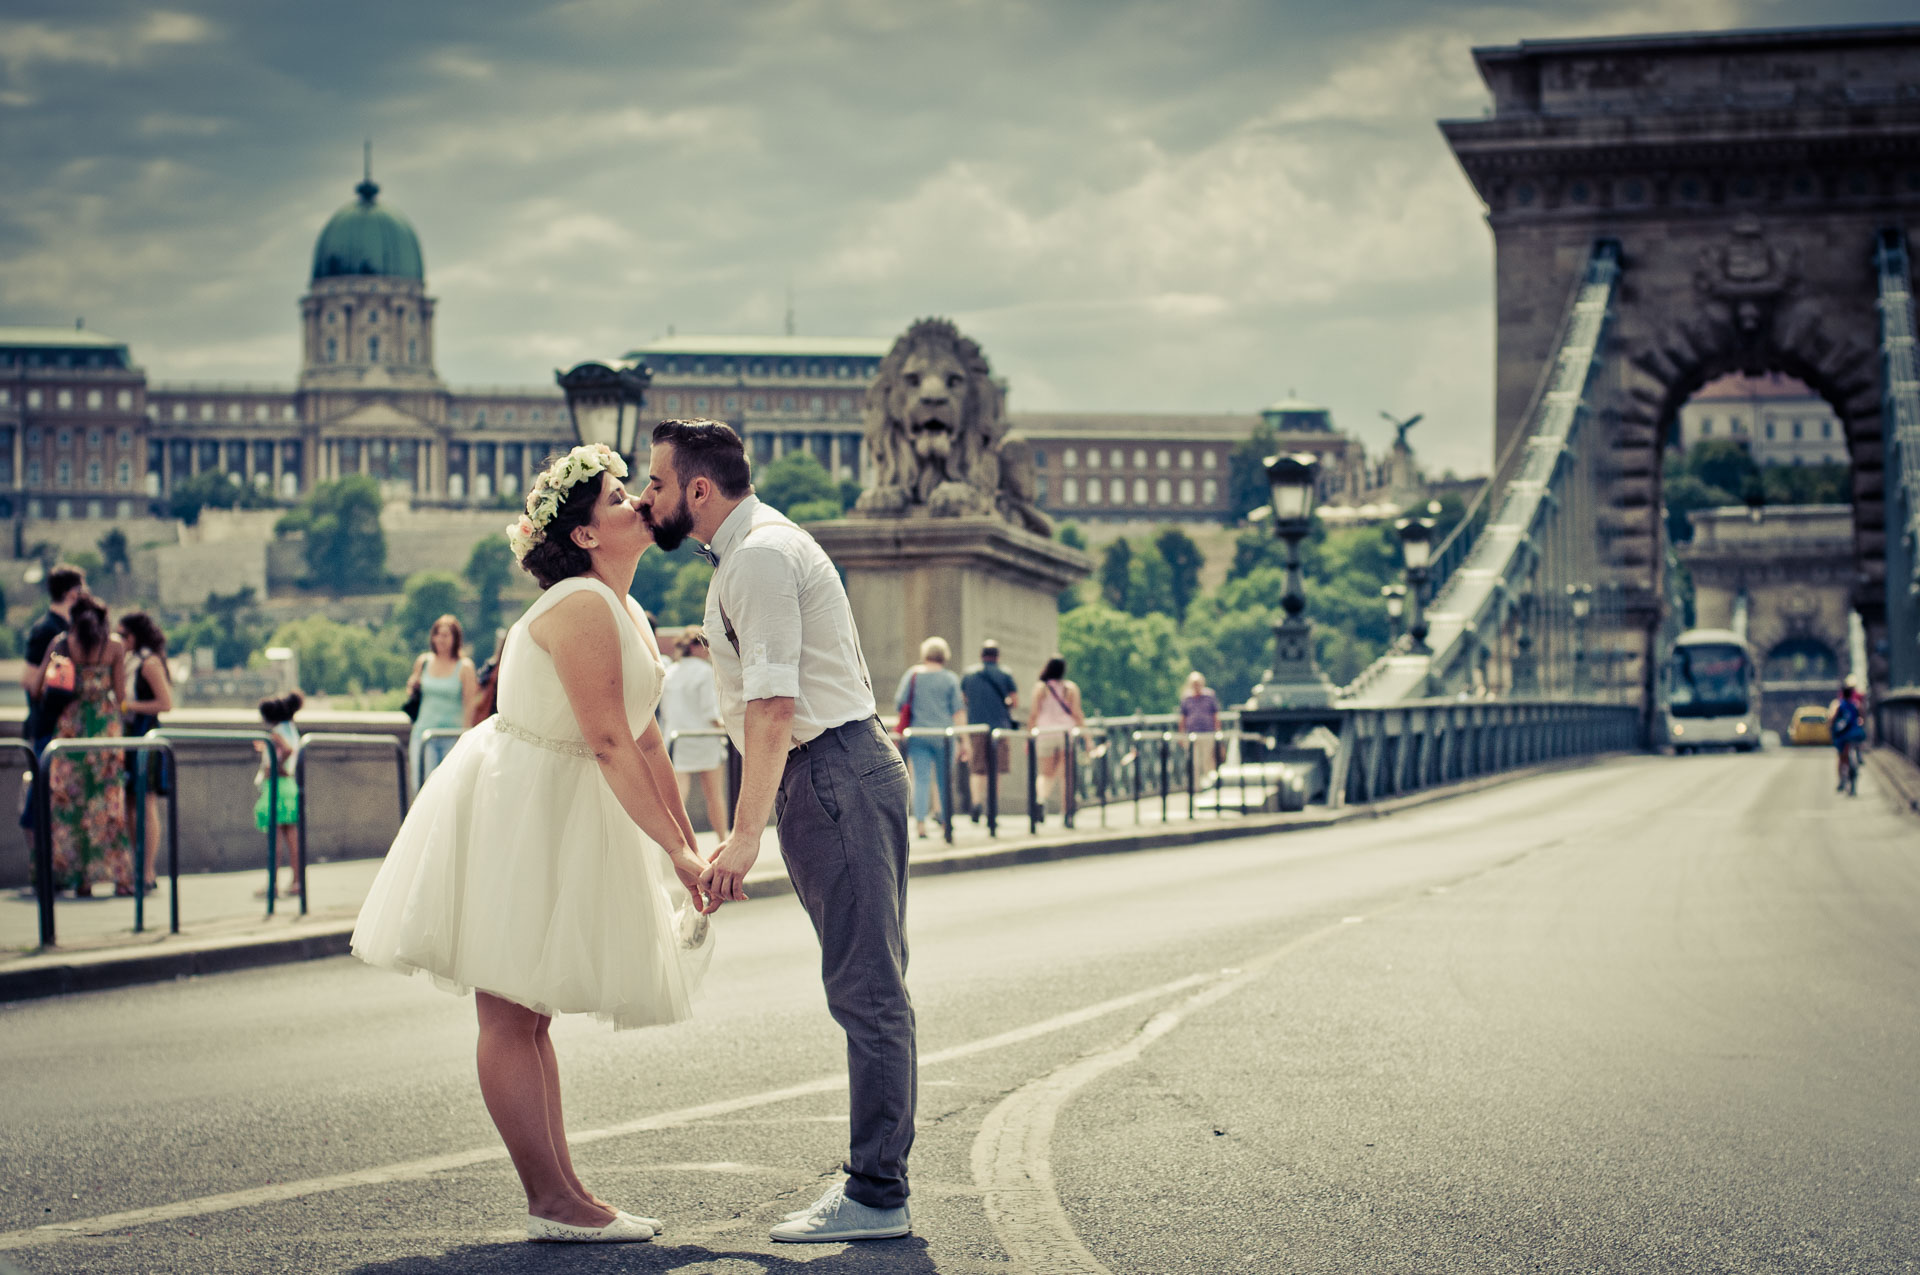 Best elopement and honeymoon place in Europe is Budapest city - super romantic backdrop with Chain bridge